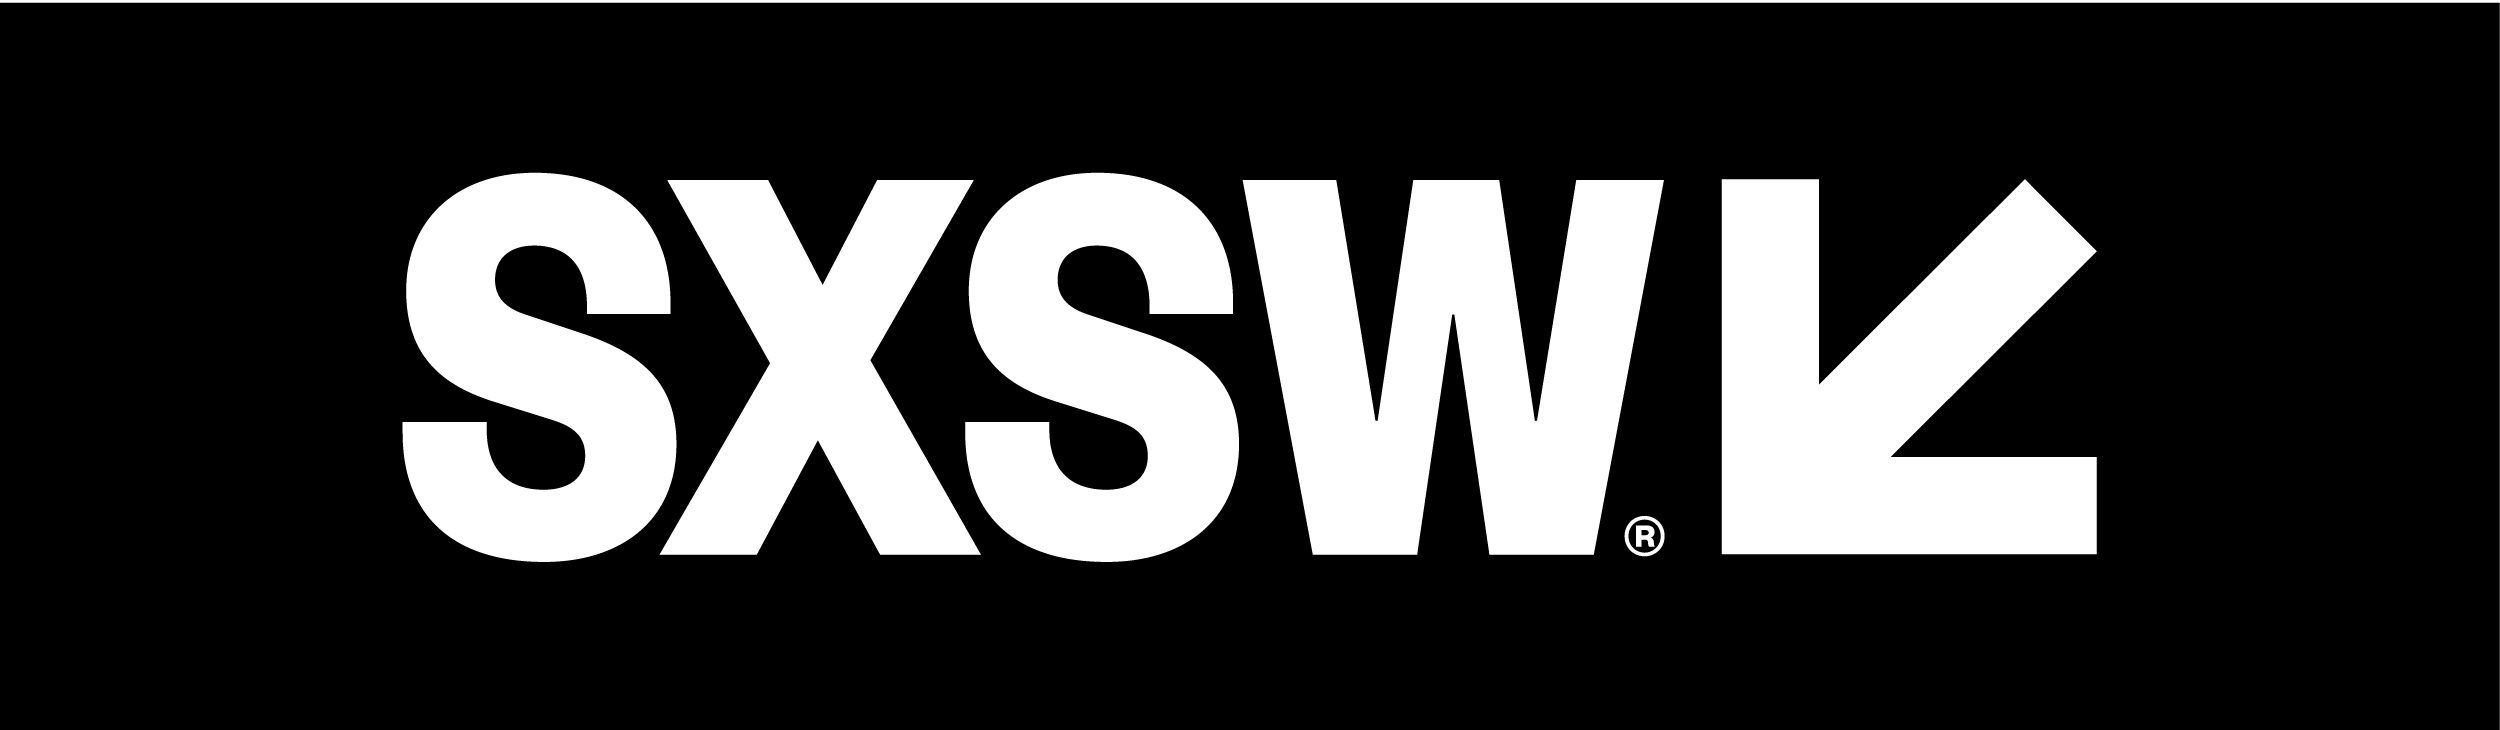 SXSW Announces Initial Keynote and Second Round of Featured Speakers